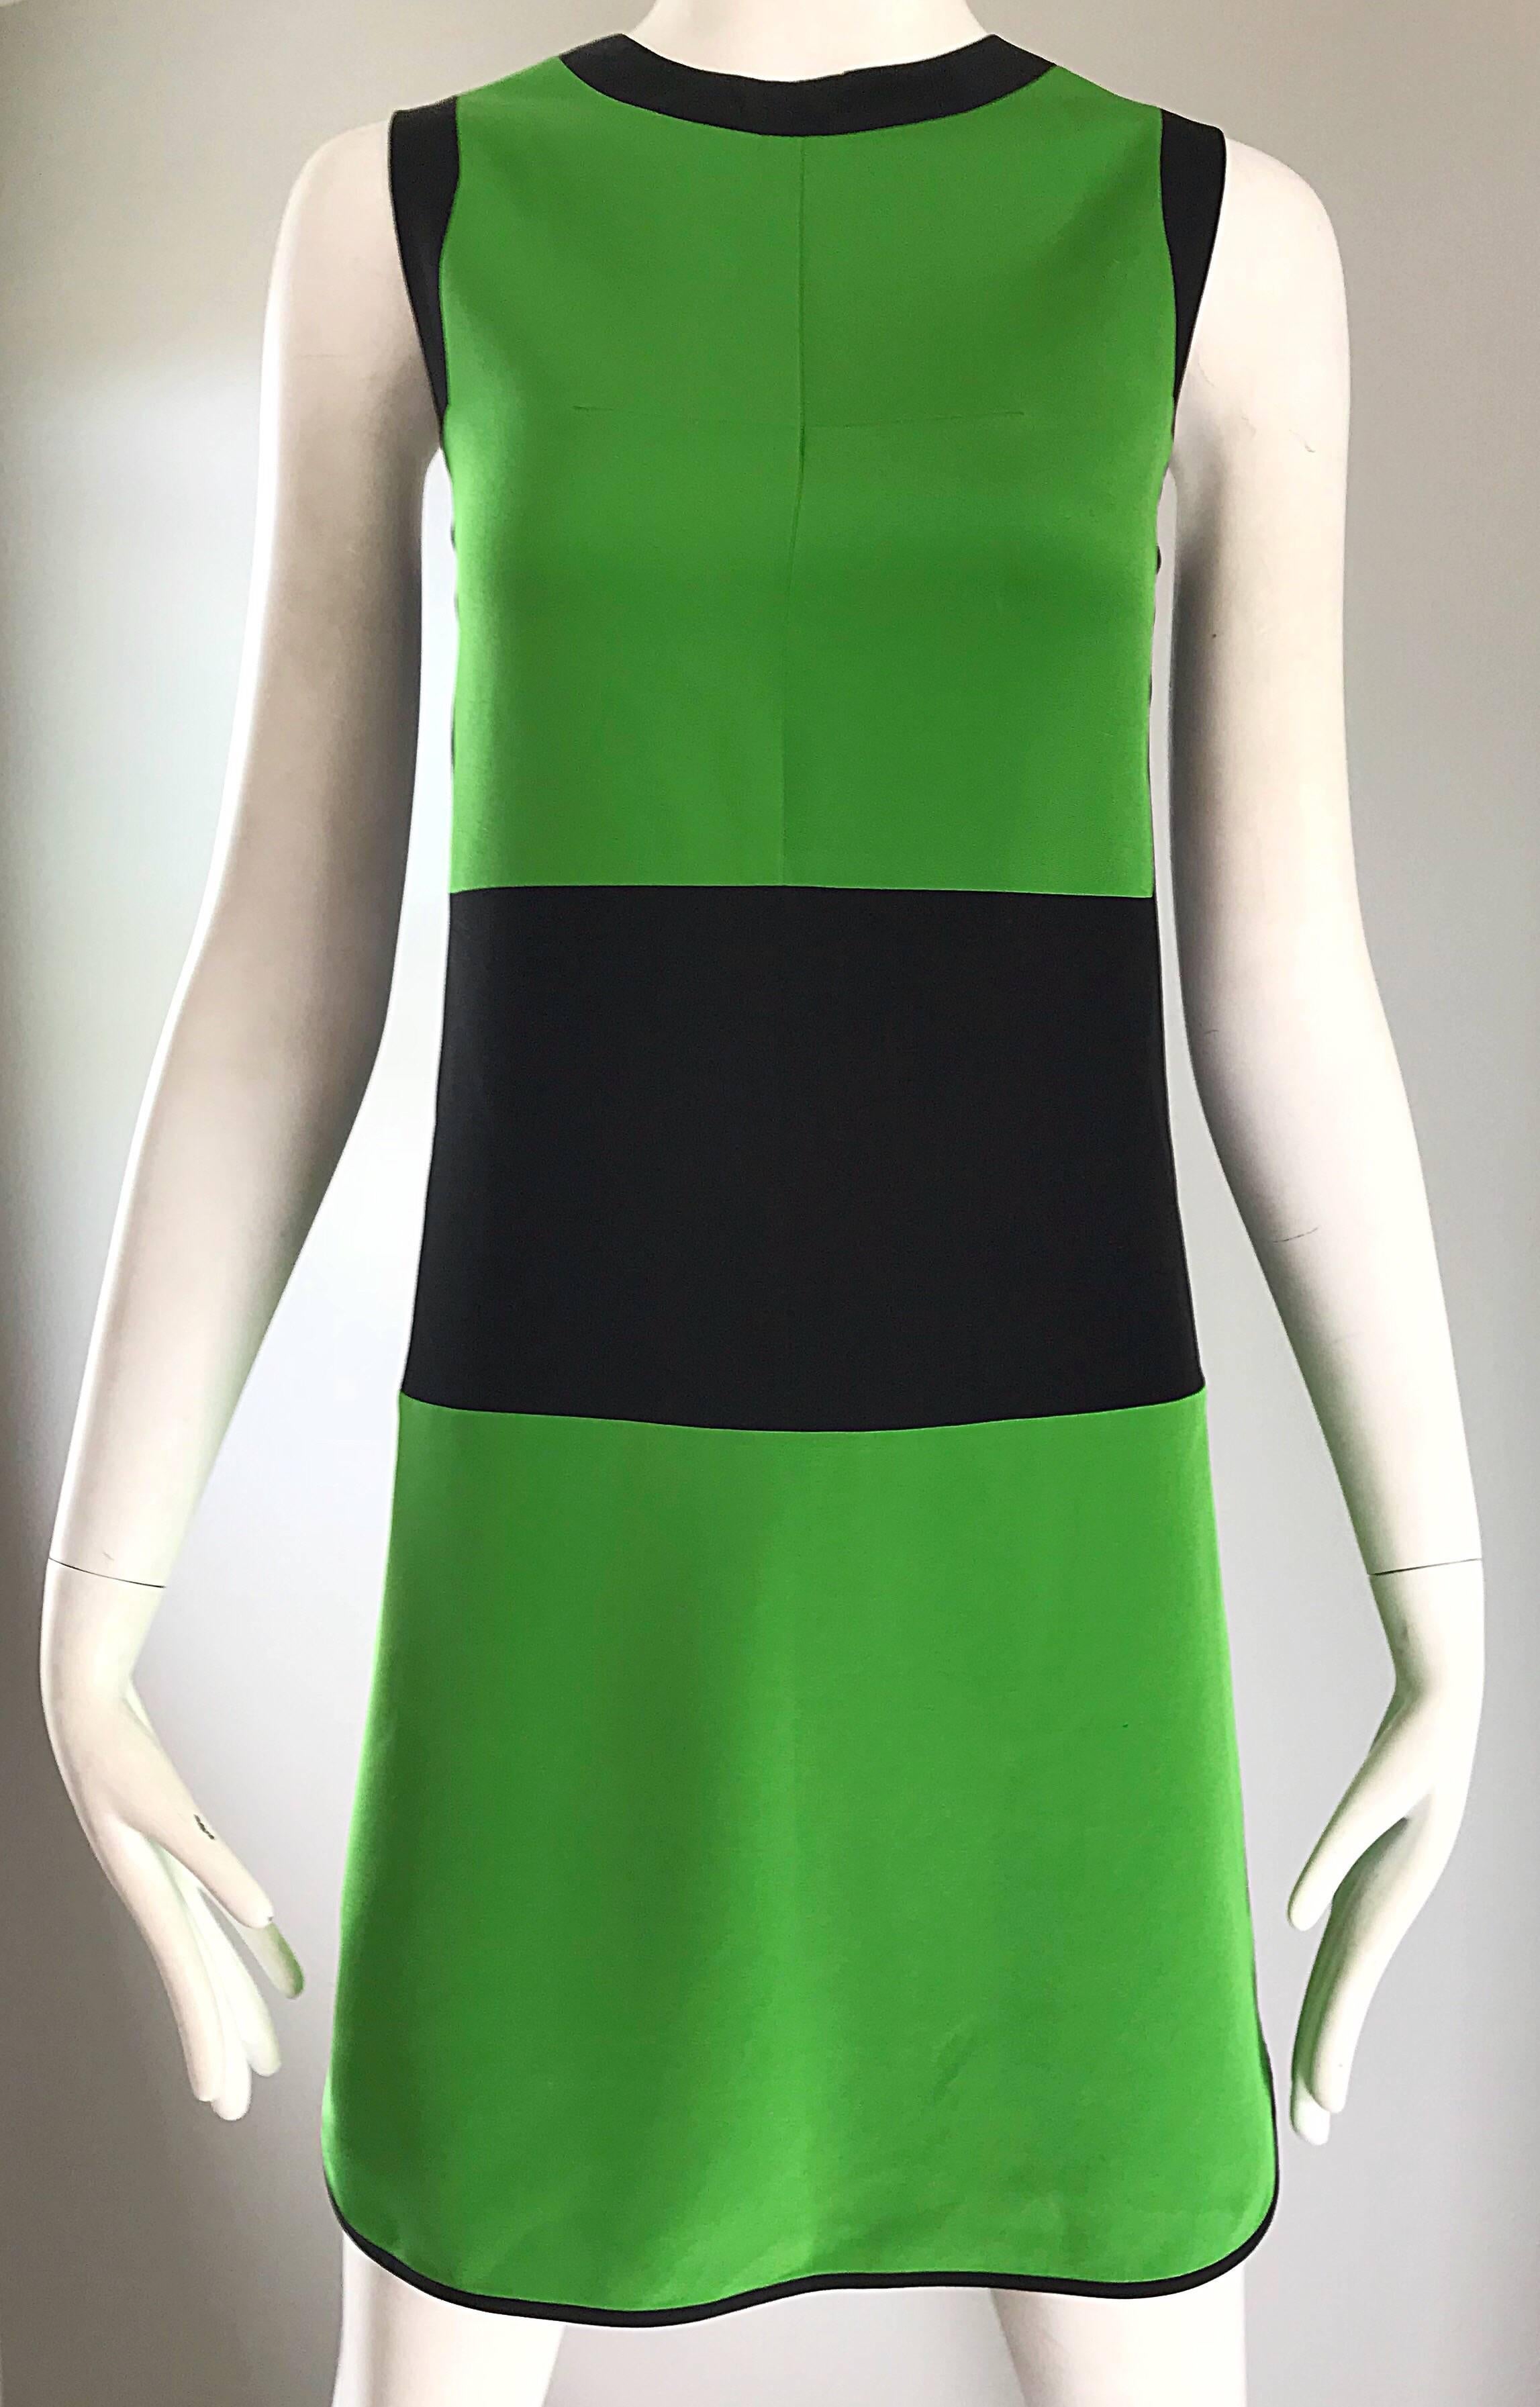 $1,695 New PRABAL GURUNG green and black color blocked sheath silk dress! Has a mod 1960s / 60s style, with a fitted bodice, and straight skirt. Slightly dipped hem in the back is a bit longer than the front. Two hook-and-eye closures at top back